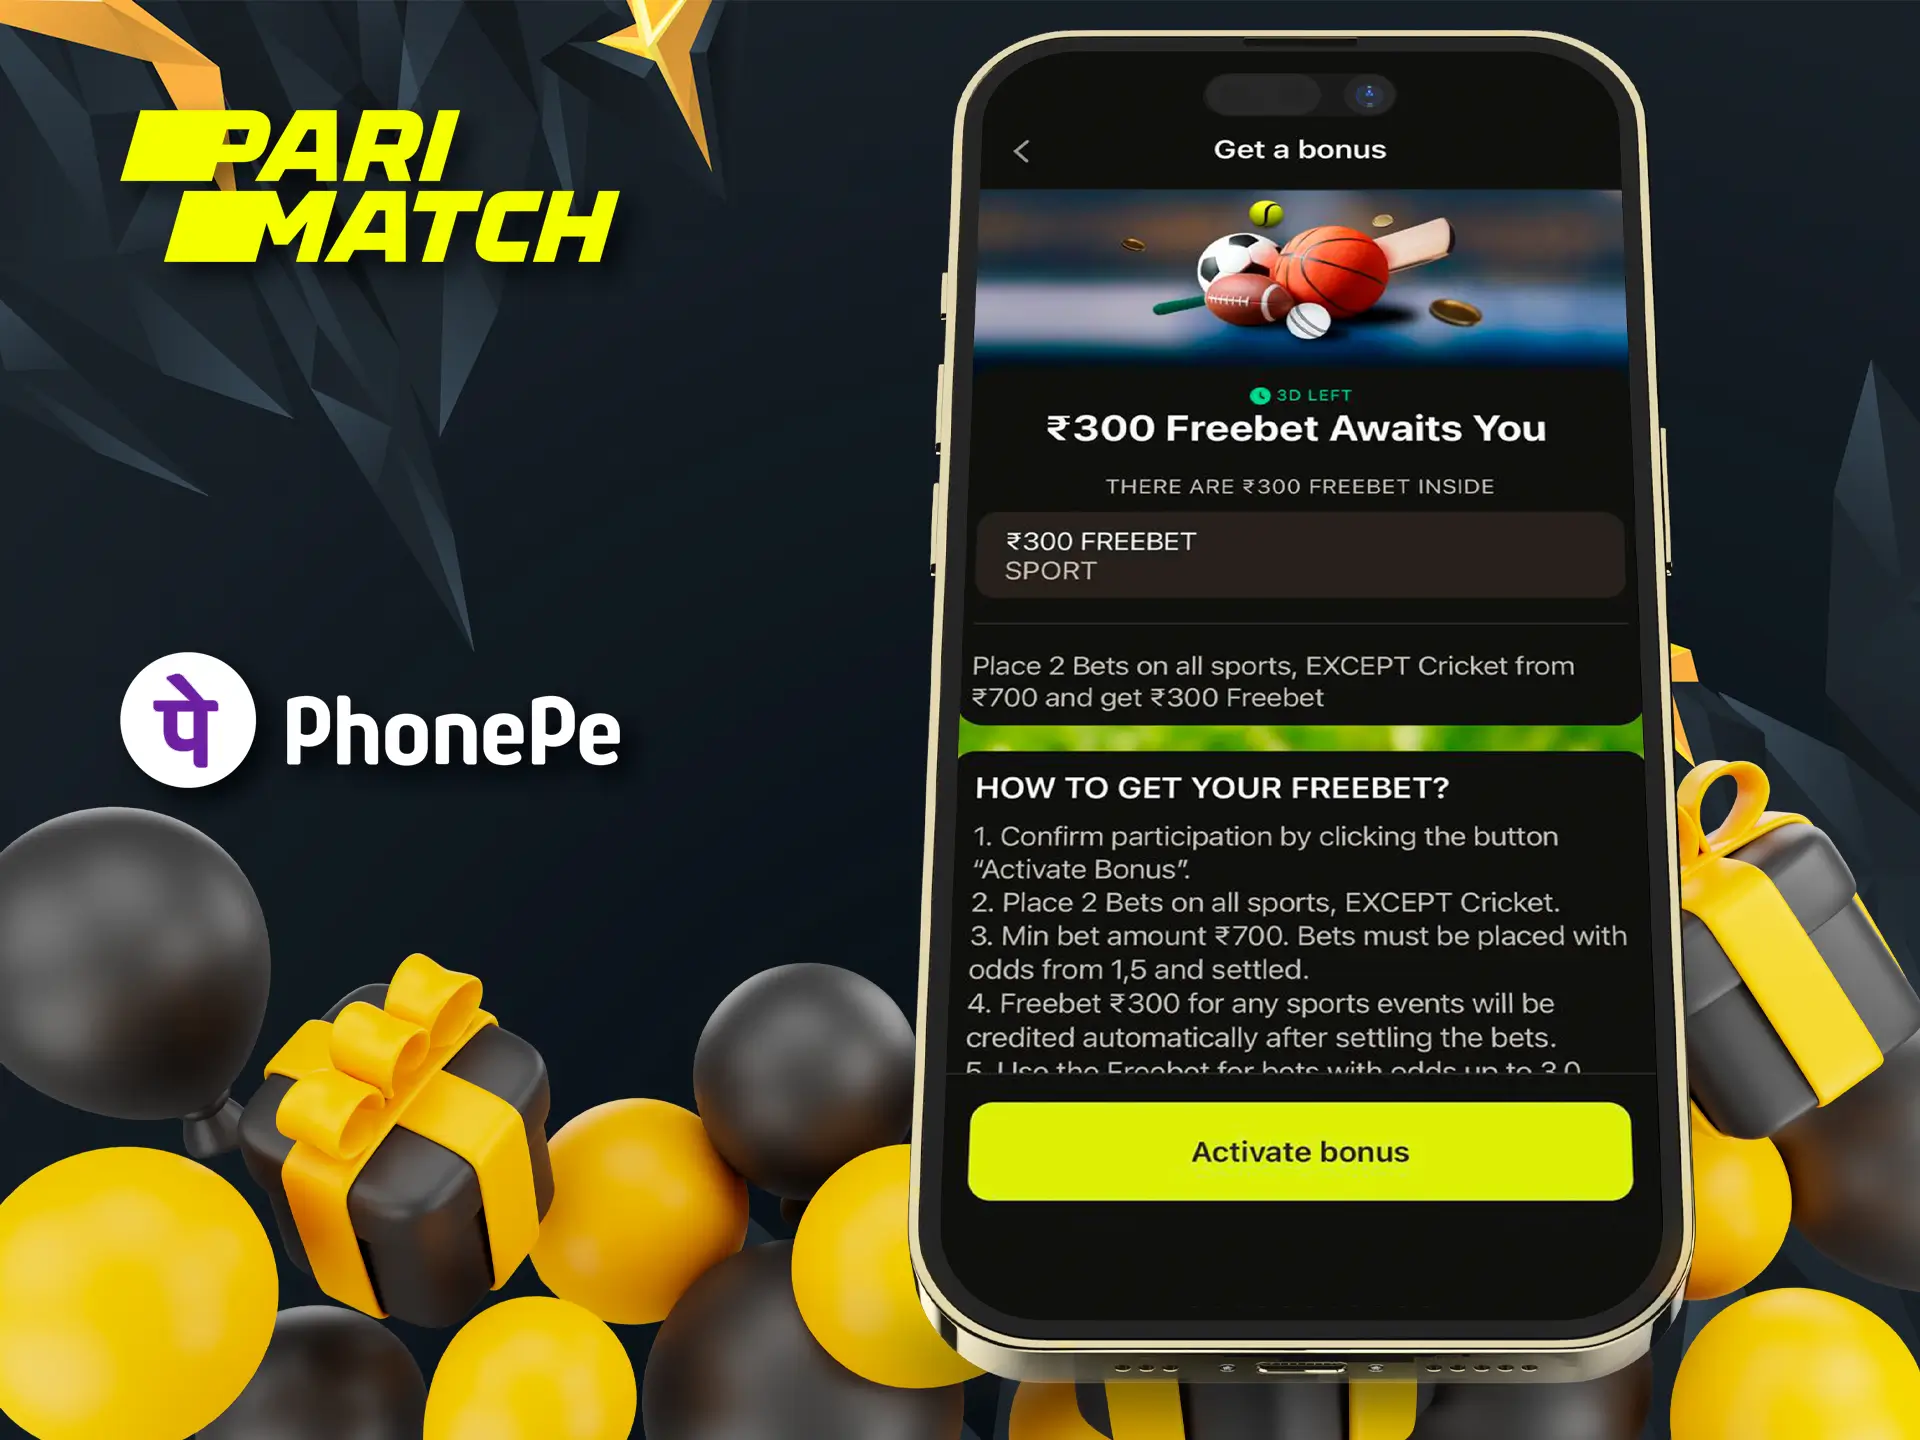 Parimatch's line-up of betting bonuses will help you win big and withdraw via PhonePe.